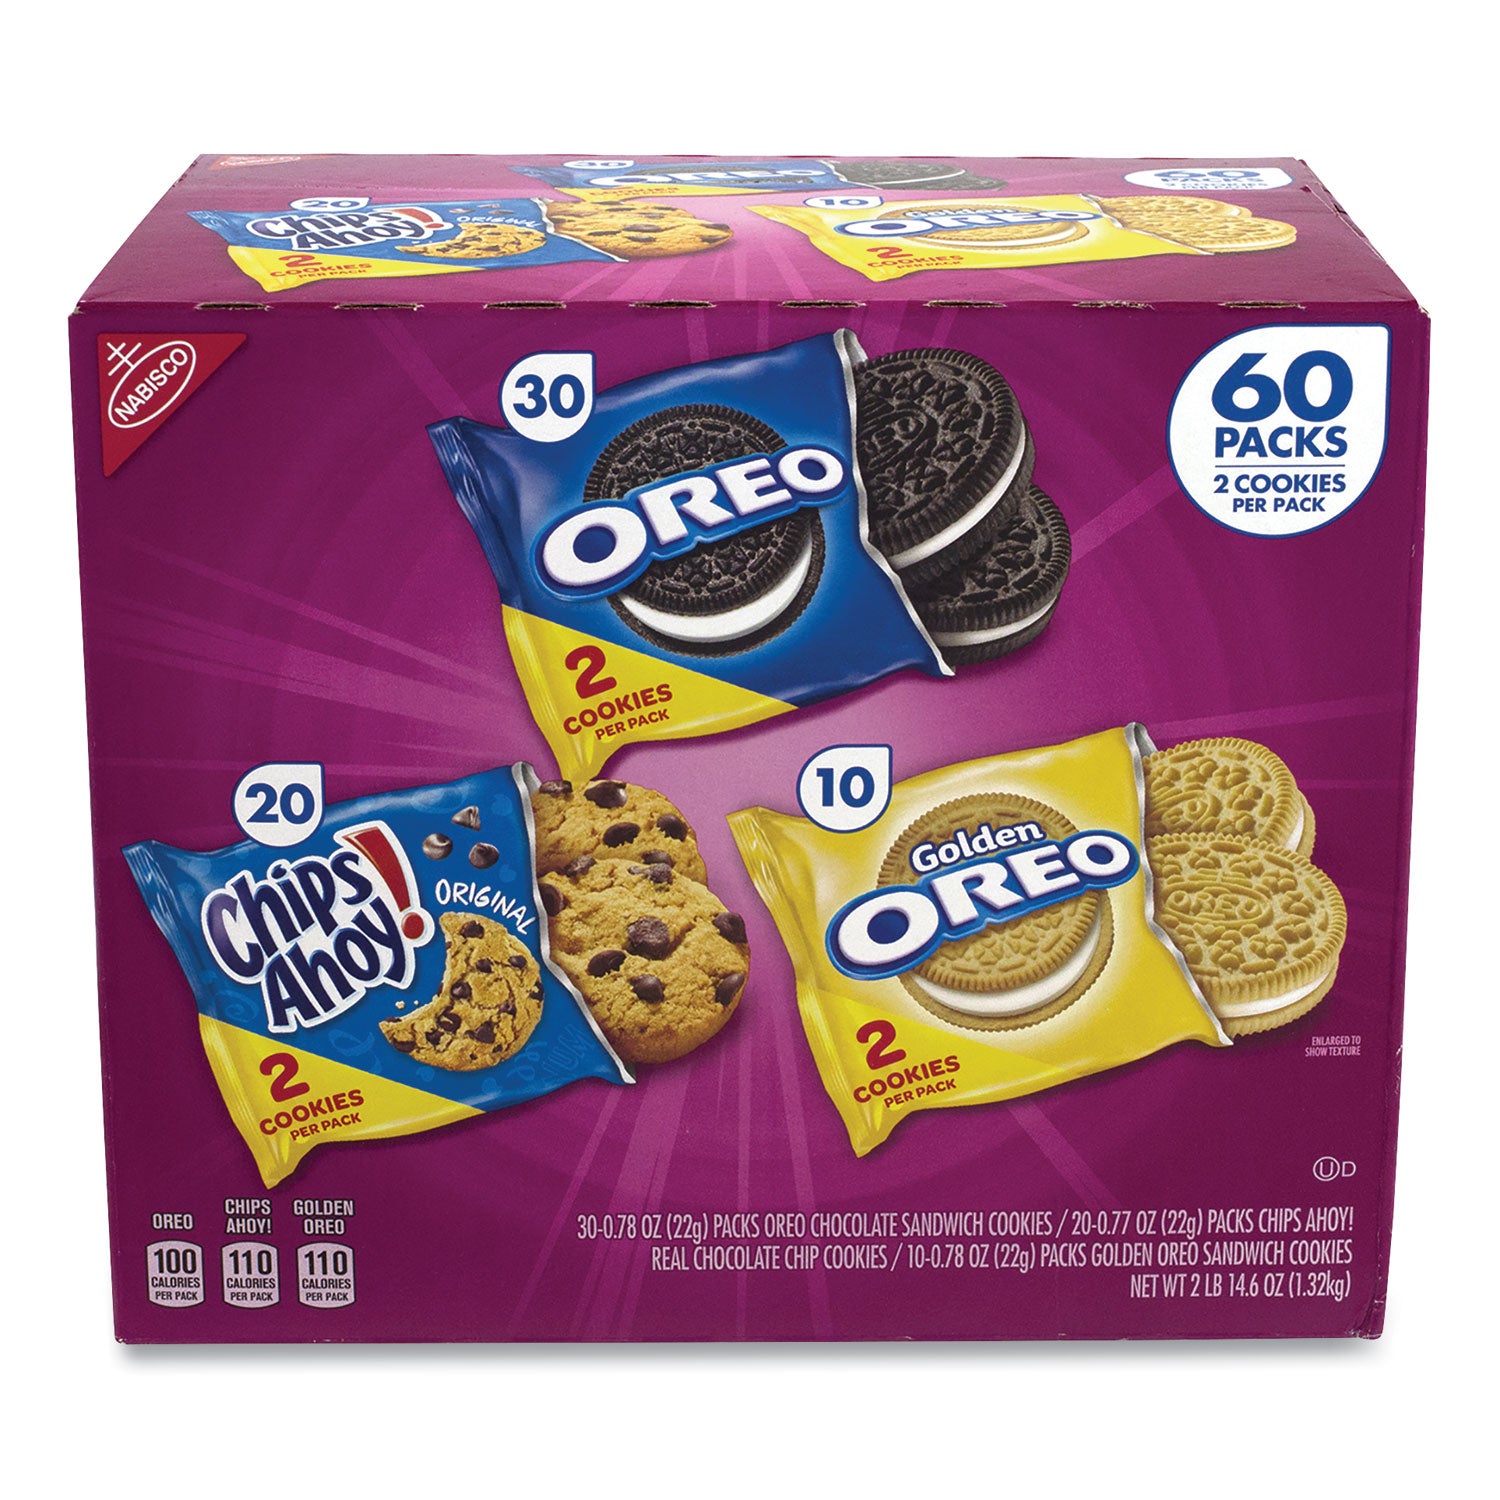 cookie-variety-pack-assorted-flavors-077-oz-pack-60-packs-carton-ships-in-1-3-business-days_grr22000729 - 1